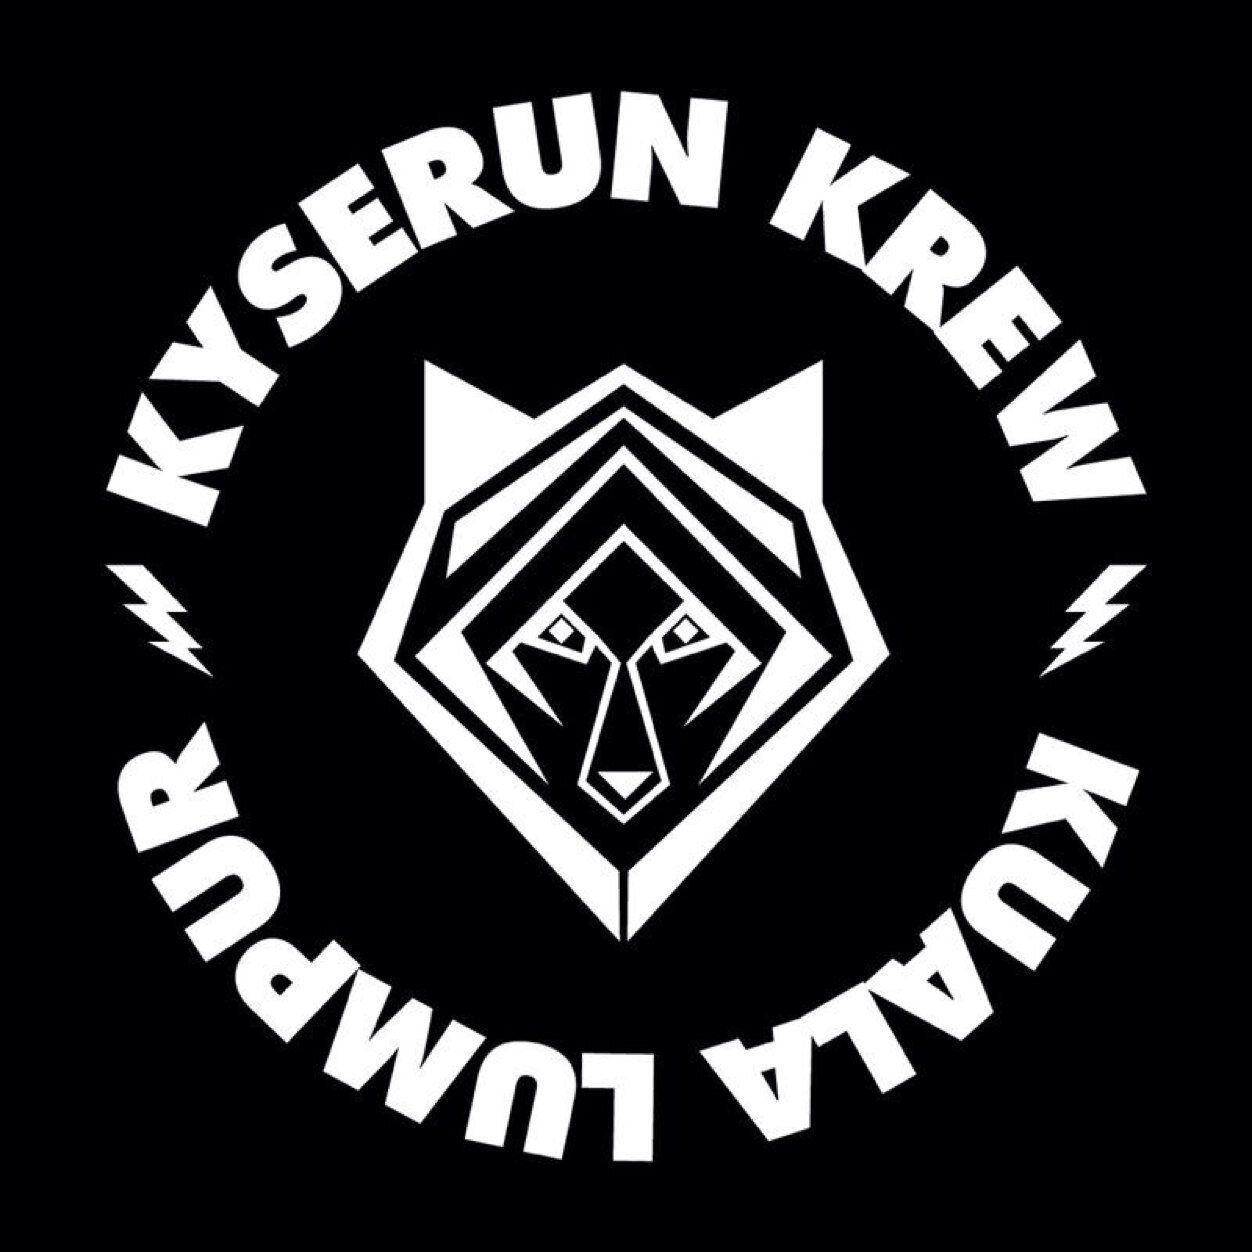 Big KR3W Logo - Kyserun Krew things ahead for this kid. Read about